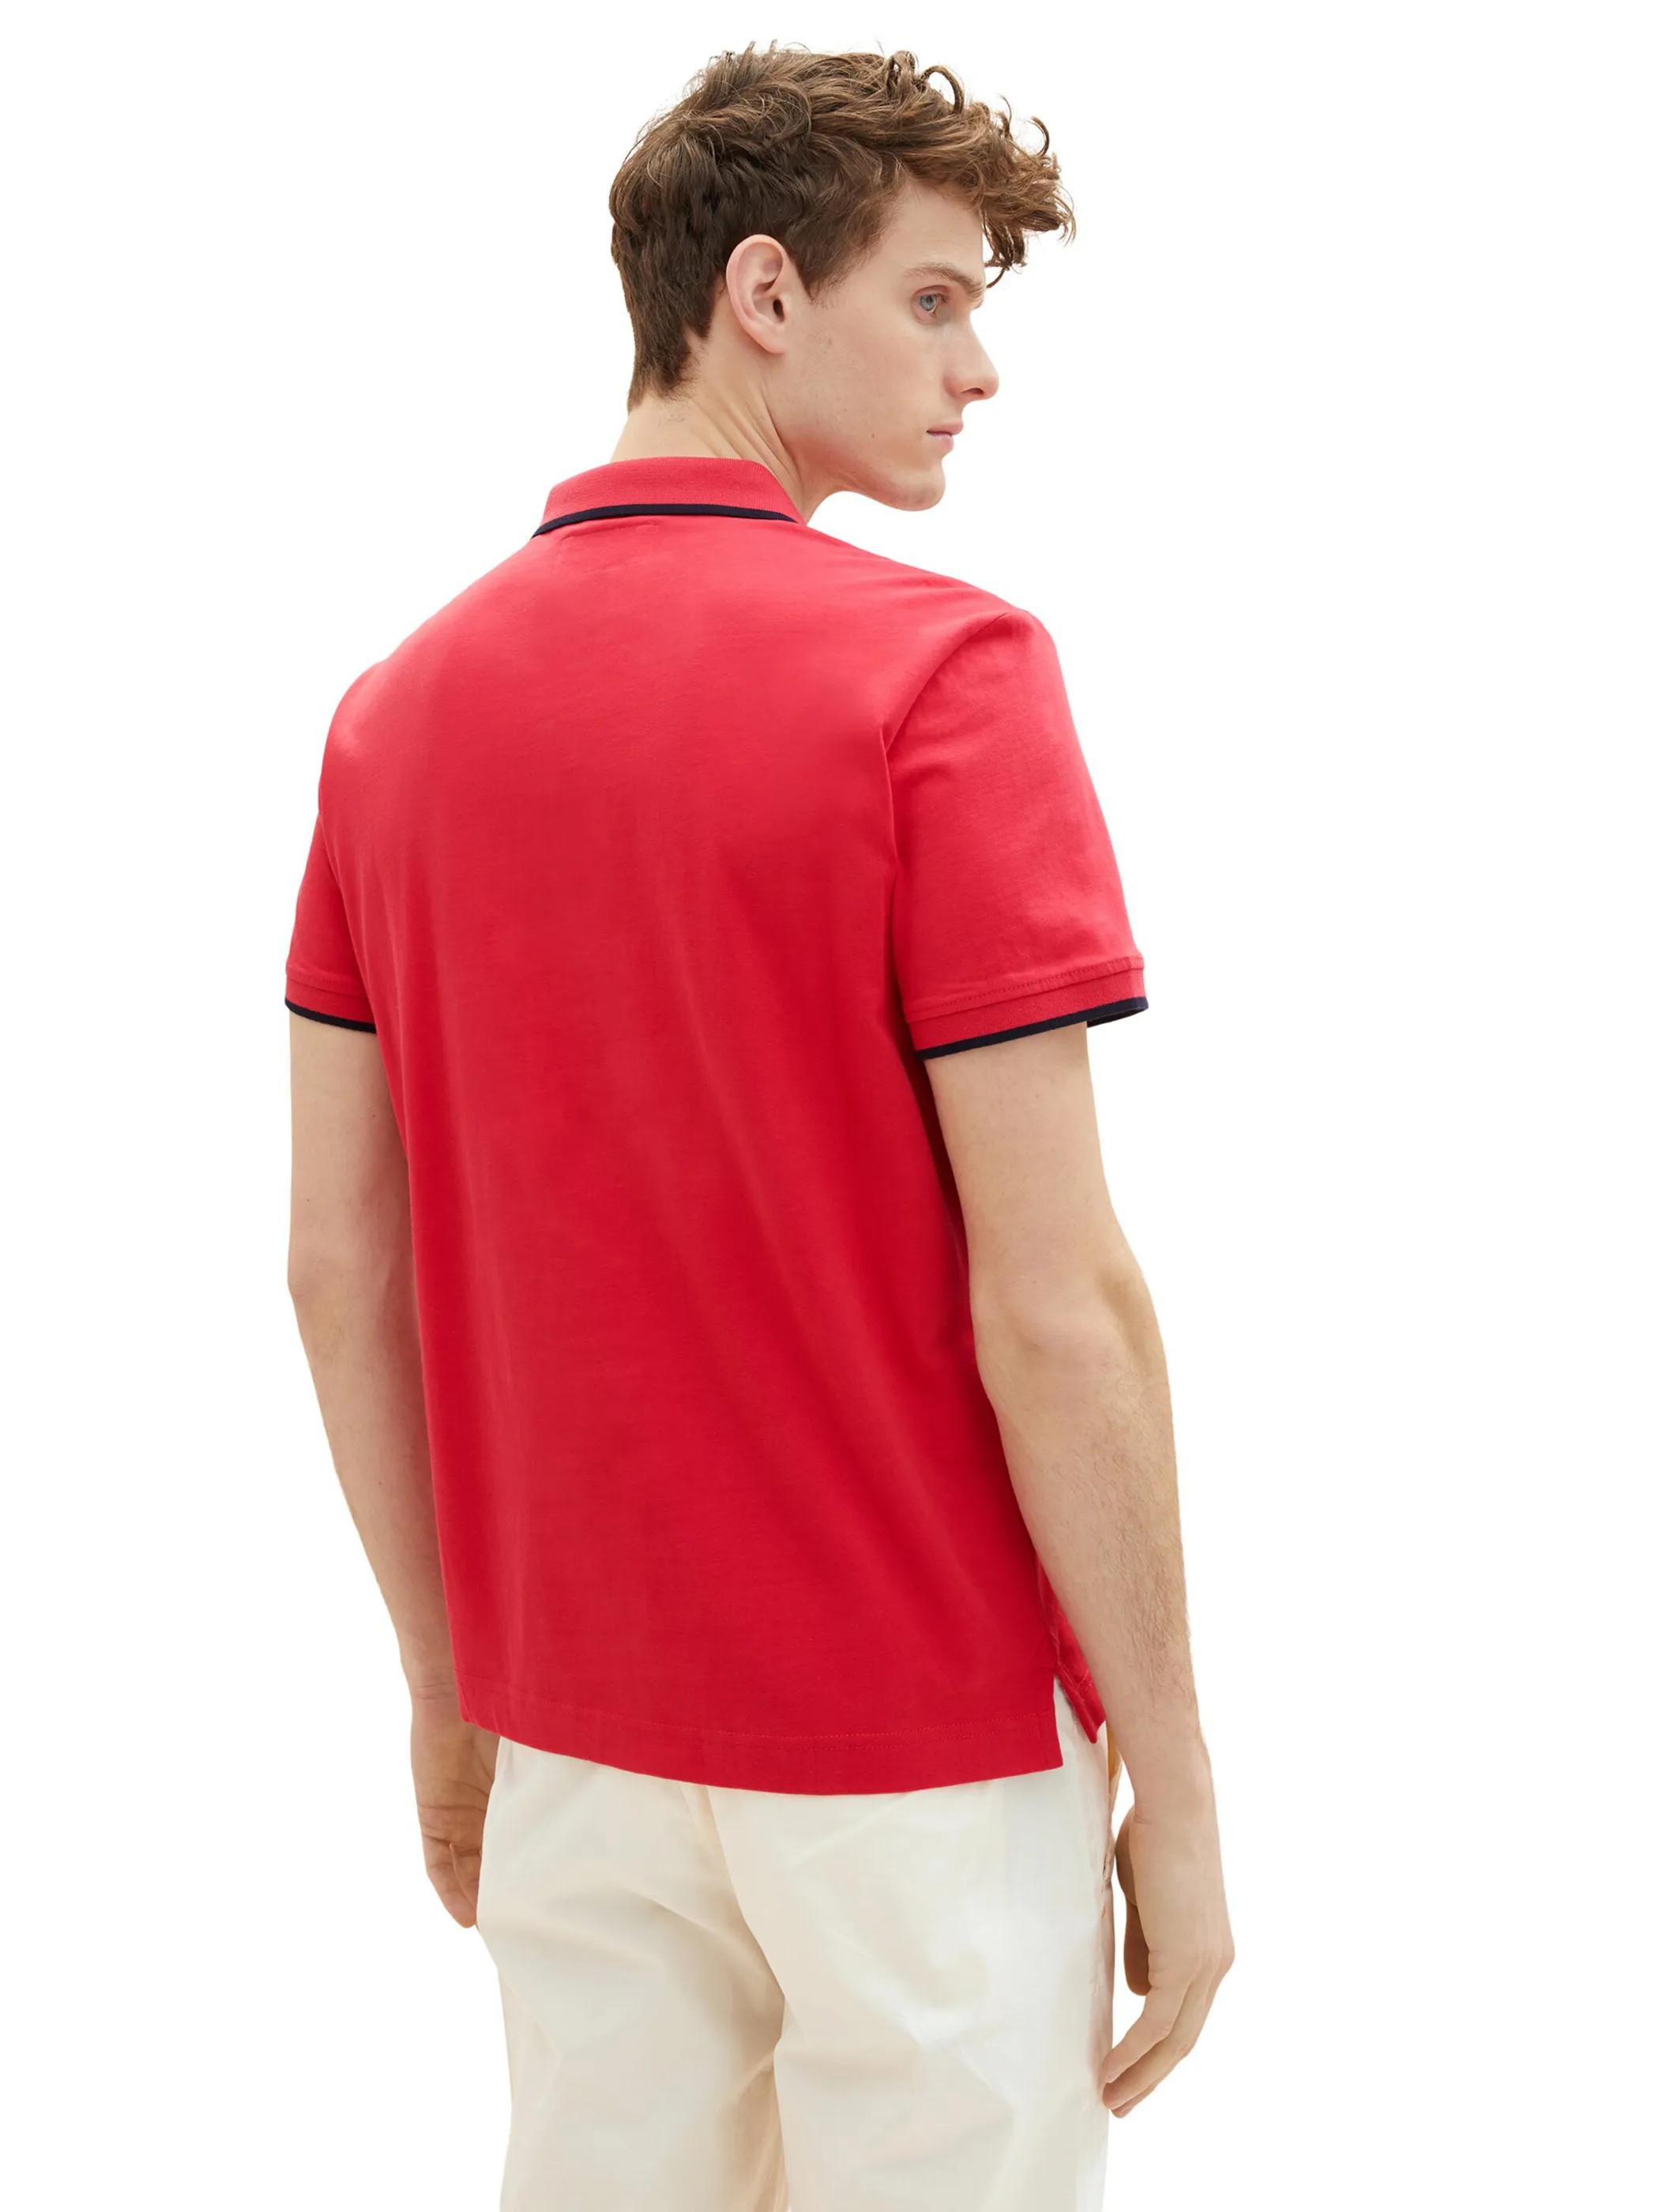 Tom Tailor 1036327 sportive jersey polo Rot 880547 31045 2